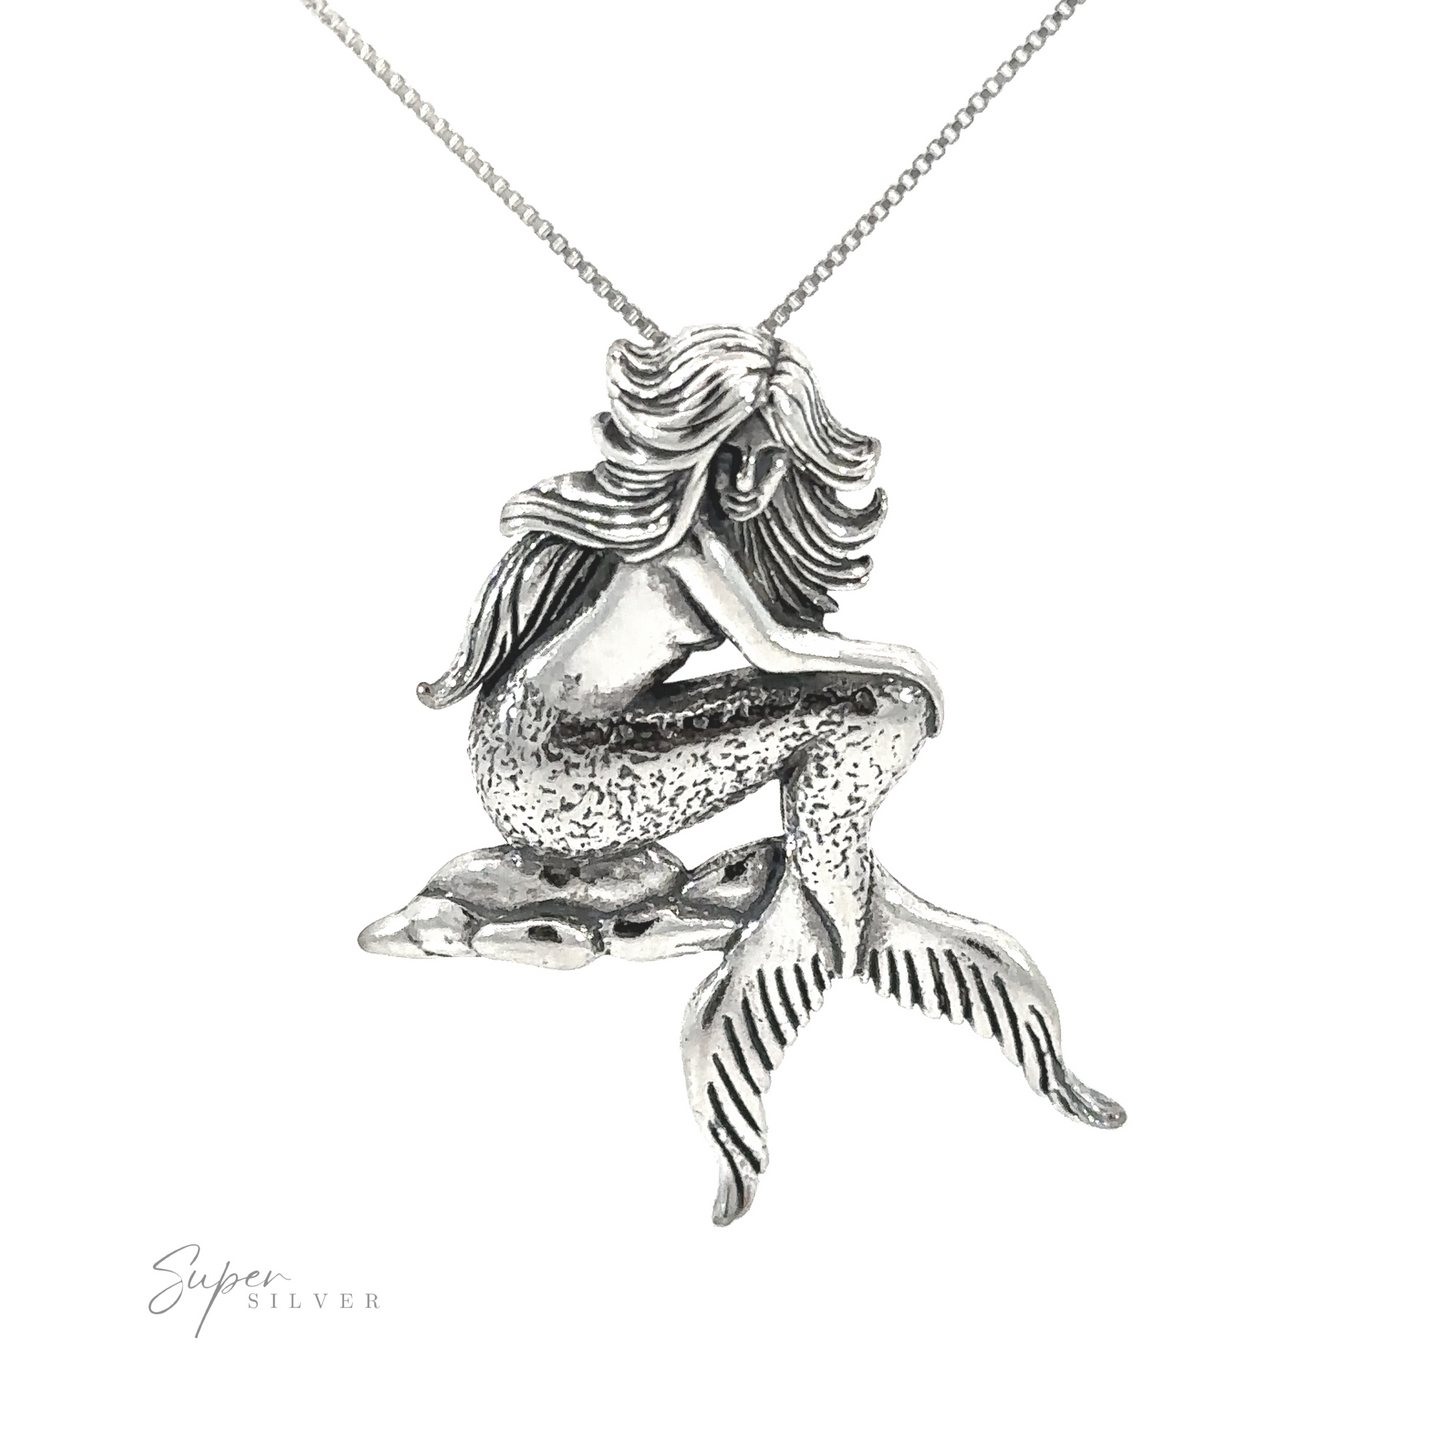 An enchanting Seductive Mermaid Pendant featuring a silver mermaid gracefully perched on a rock.